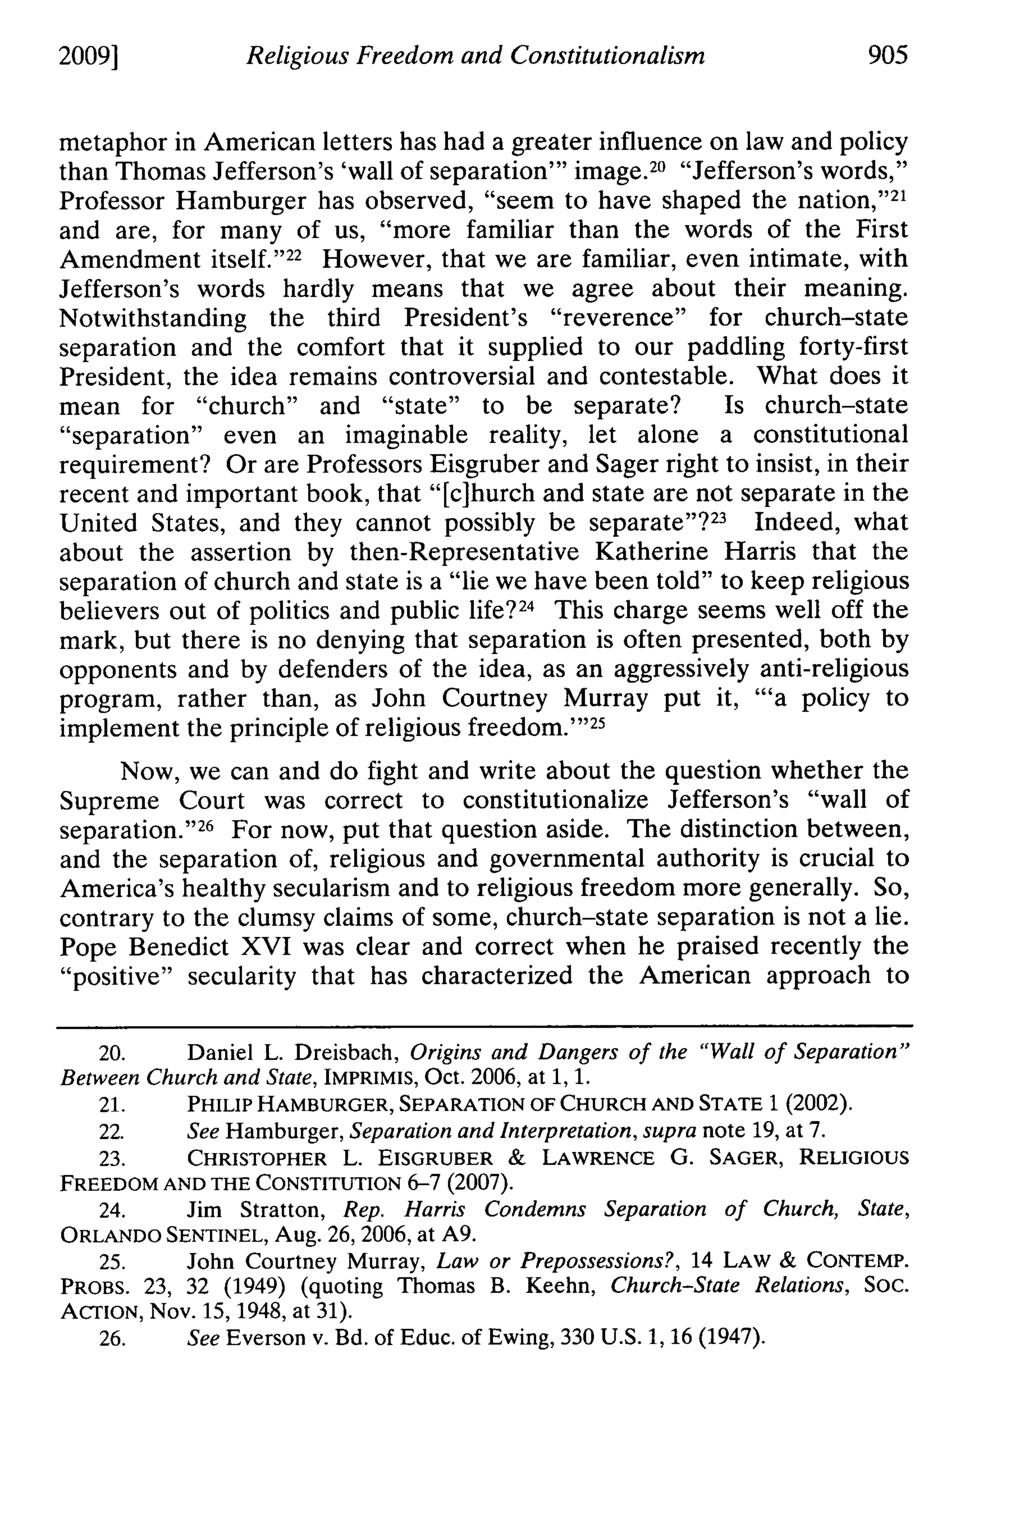 2009] Religious Freedom and Constitutionalism metaphor in American letters has had a greater influence on law and policy than Thomas Jefferson's 'wall of separation"' image.